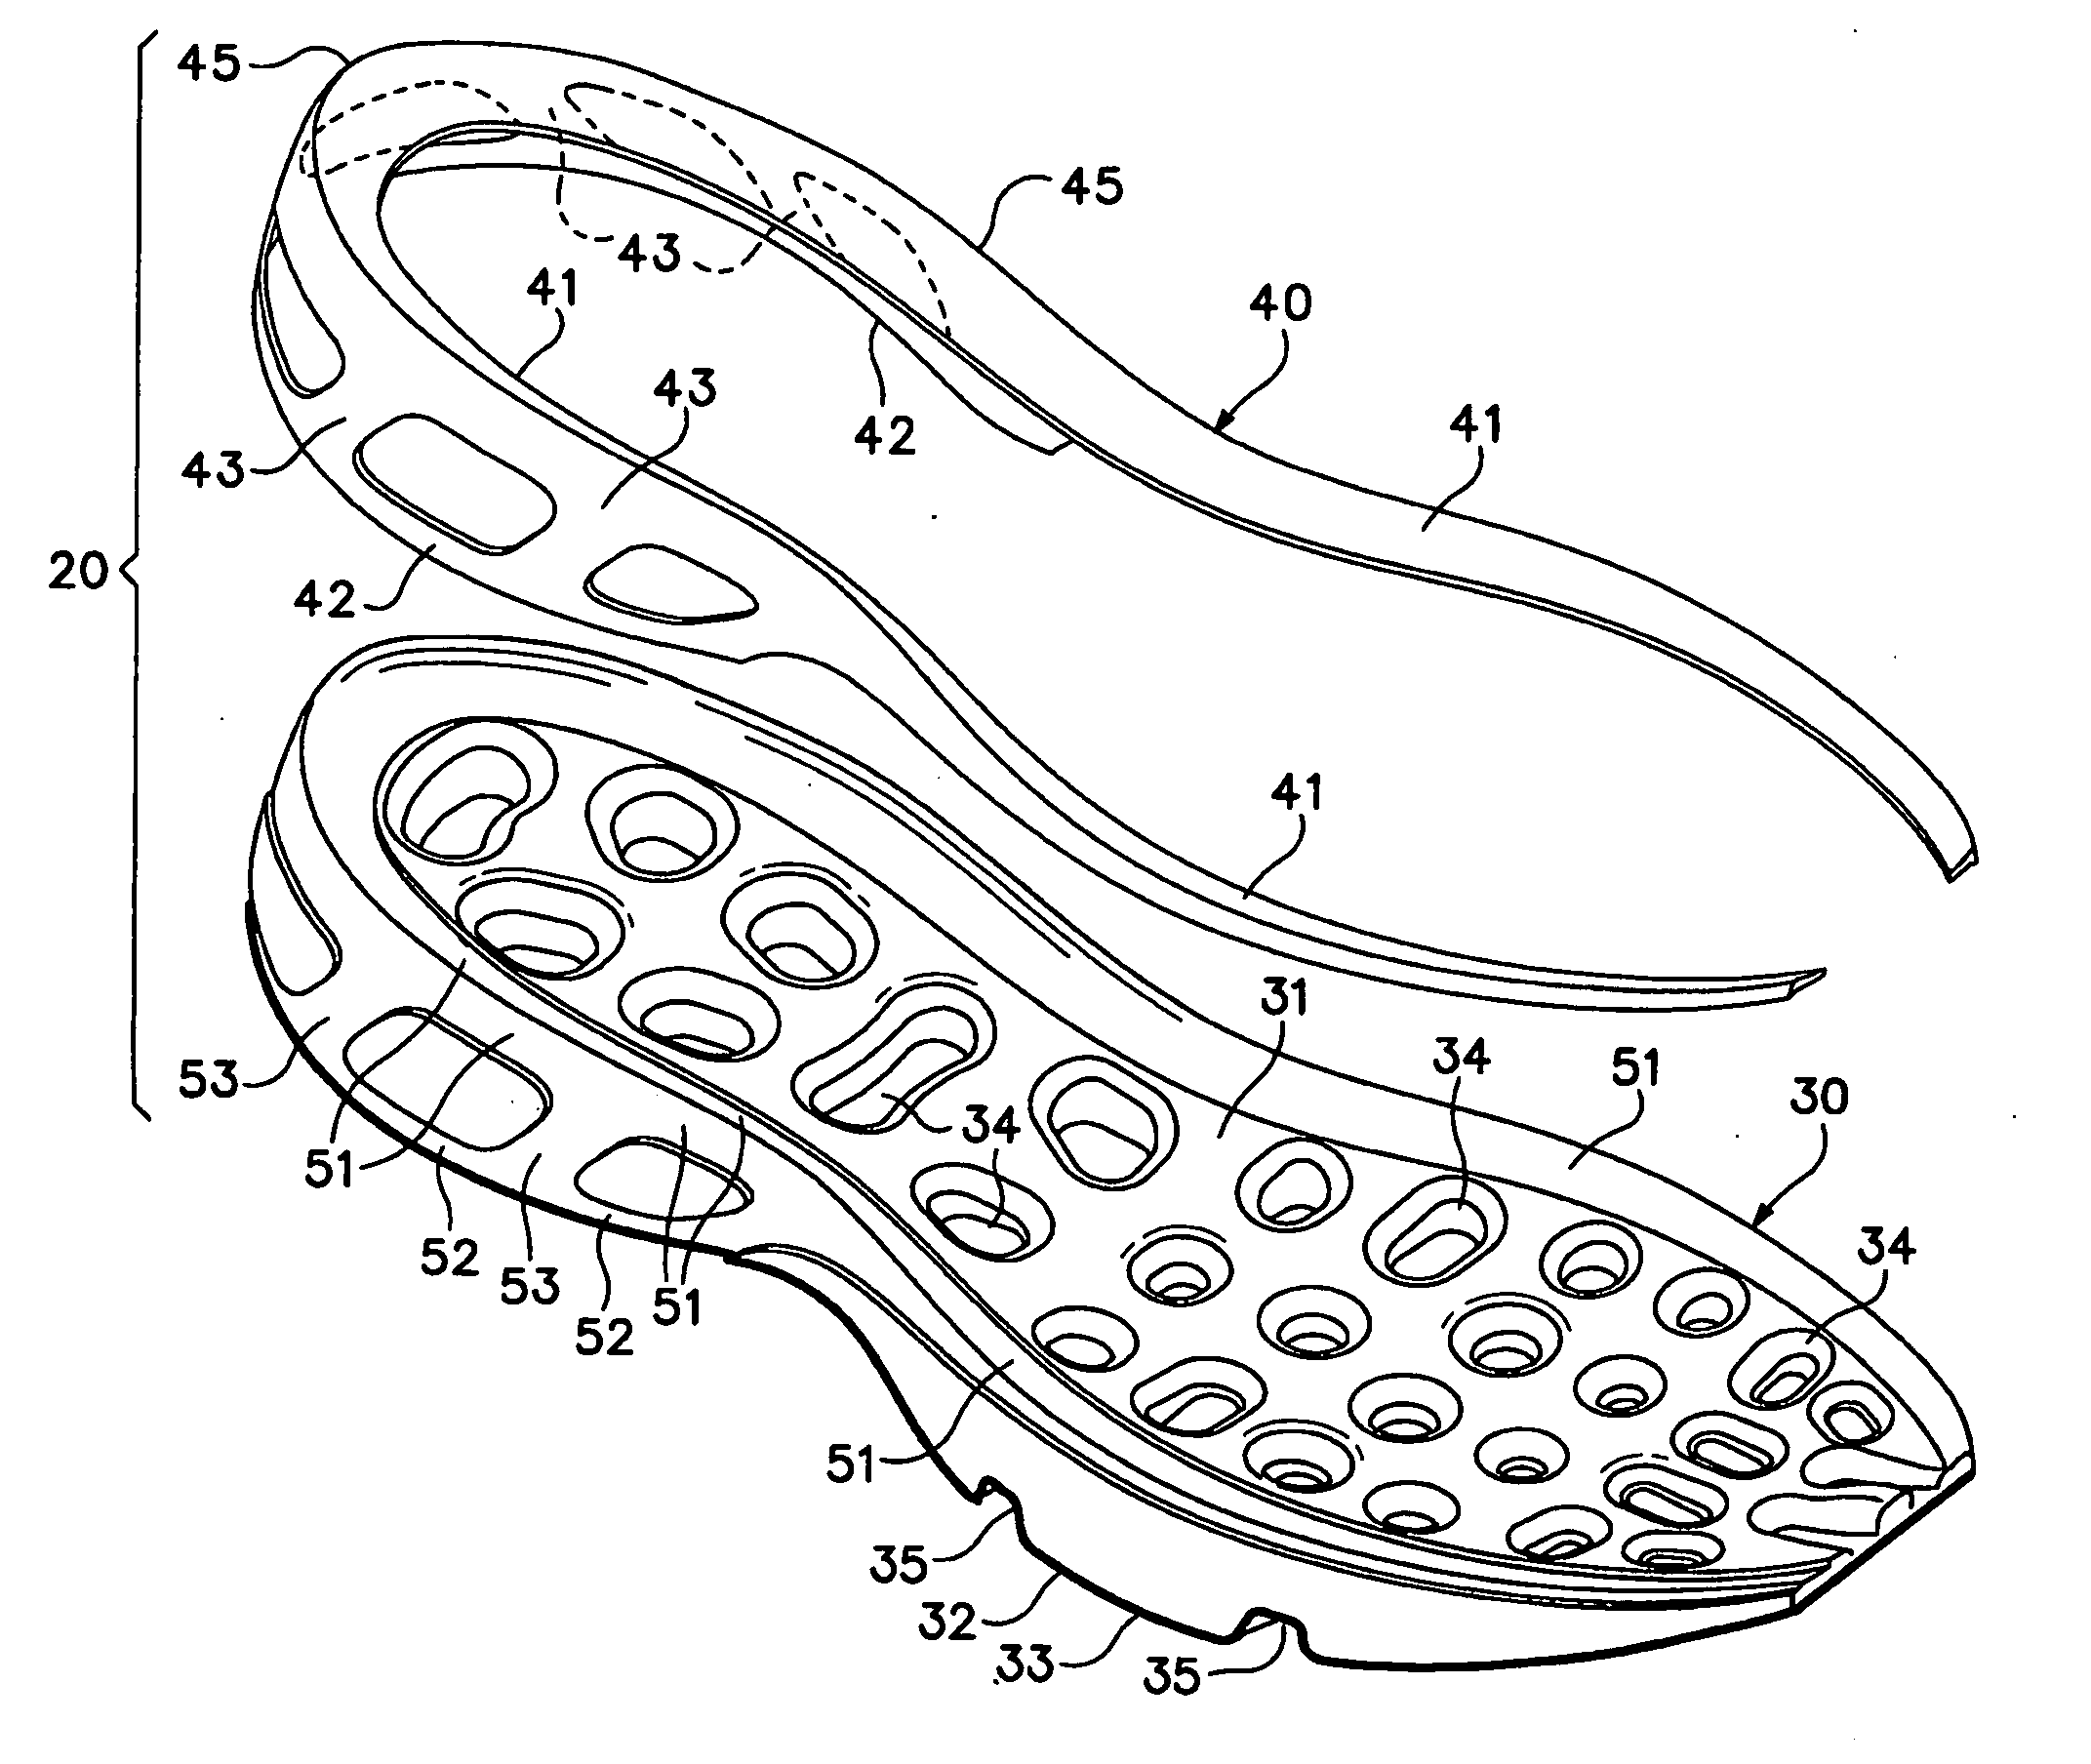 Article of footwear having a fluid-filled bladder with a reinforcing structure